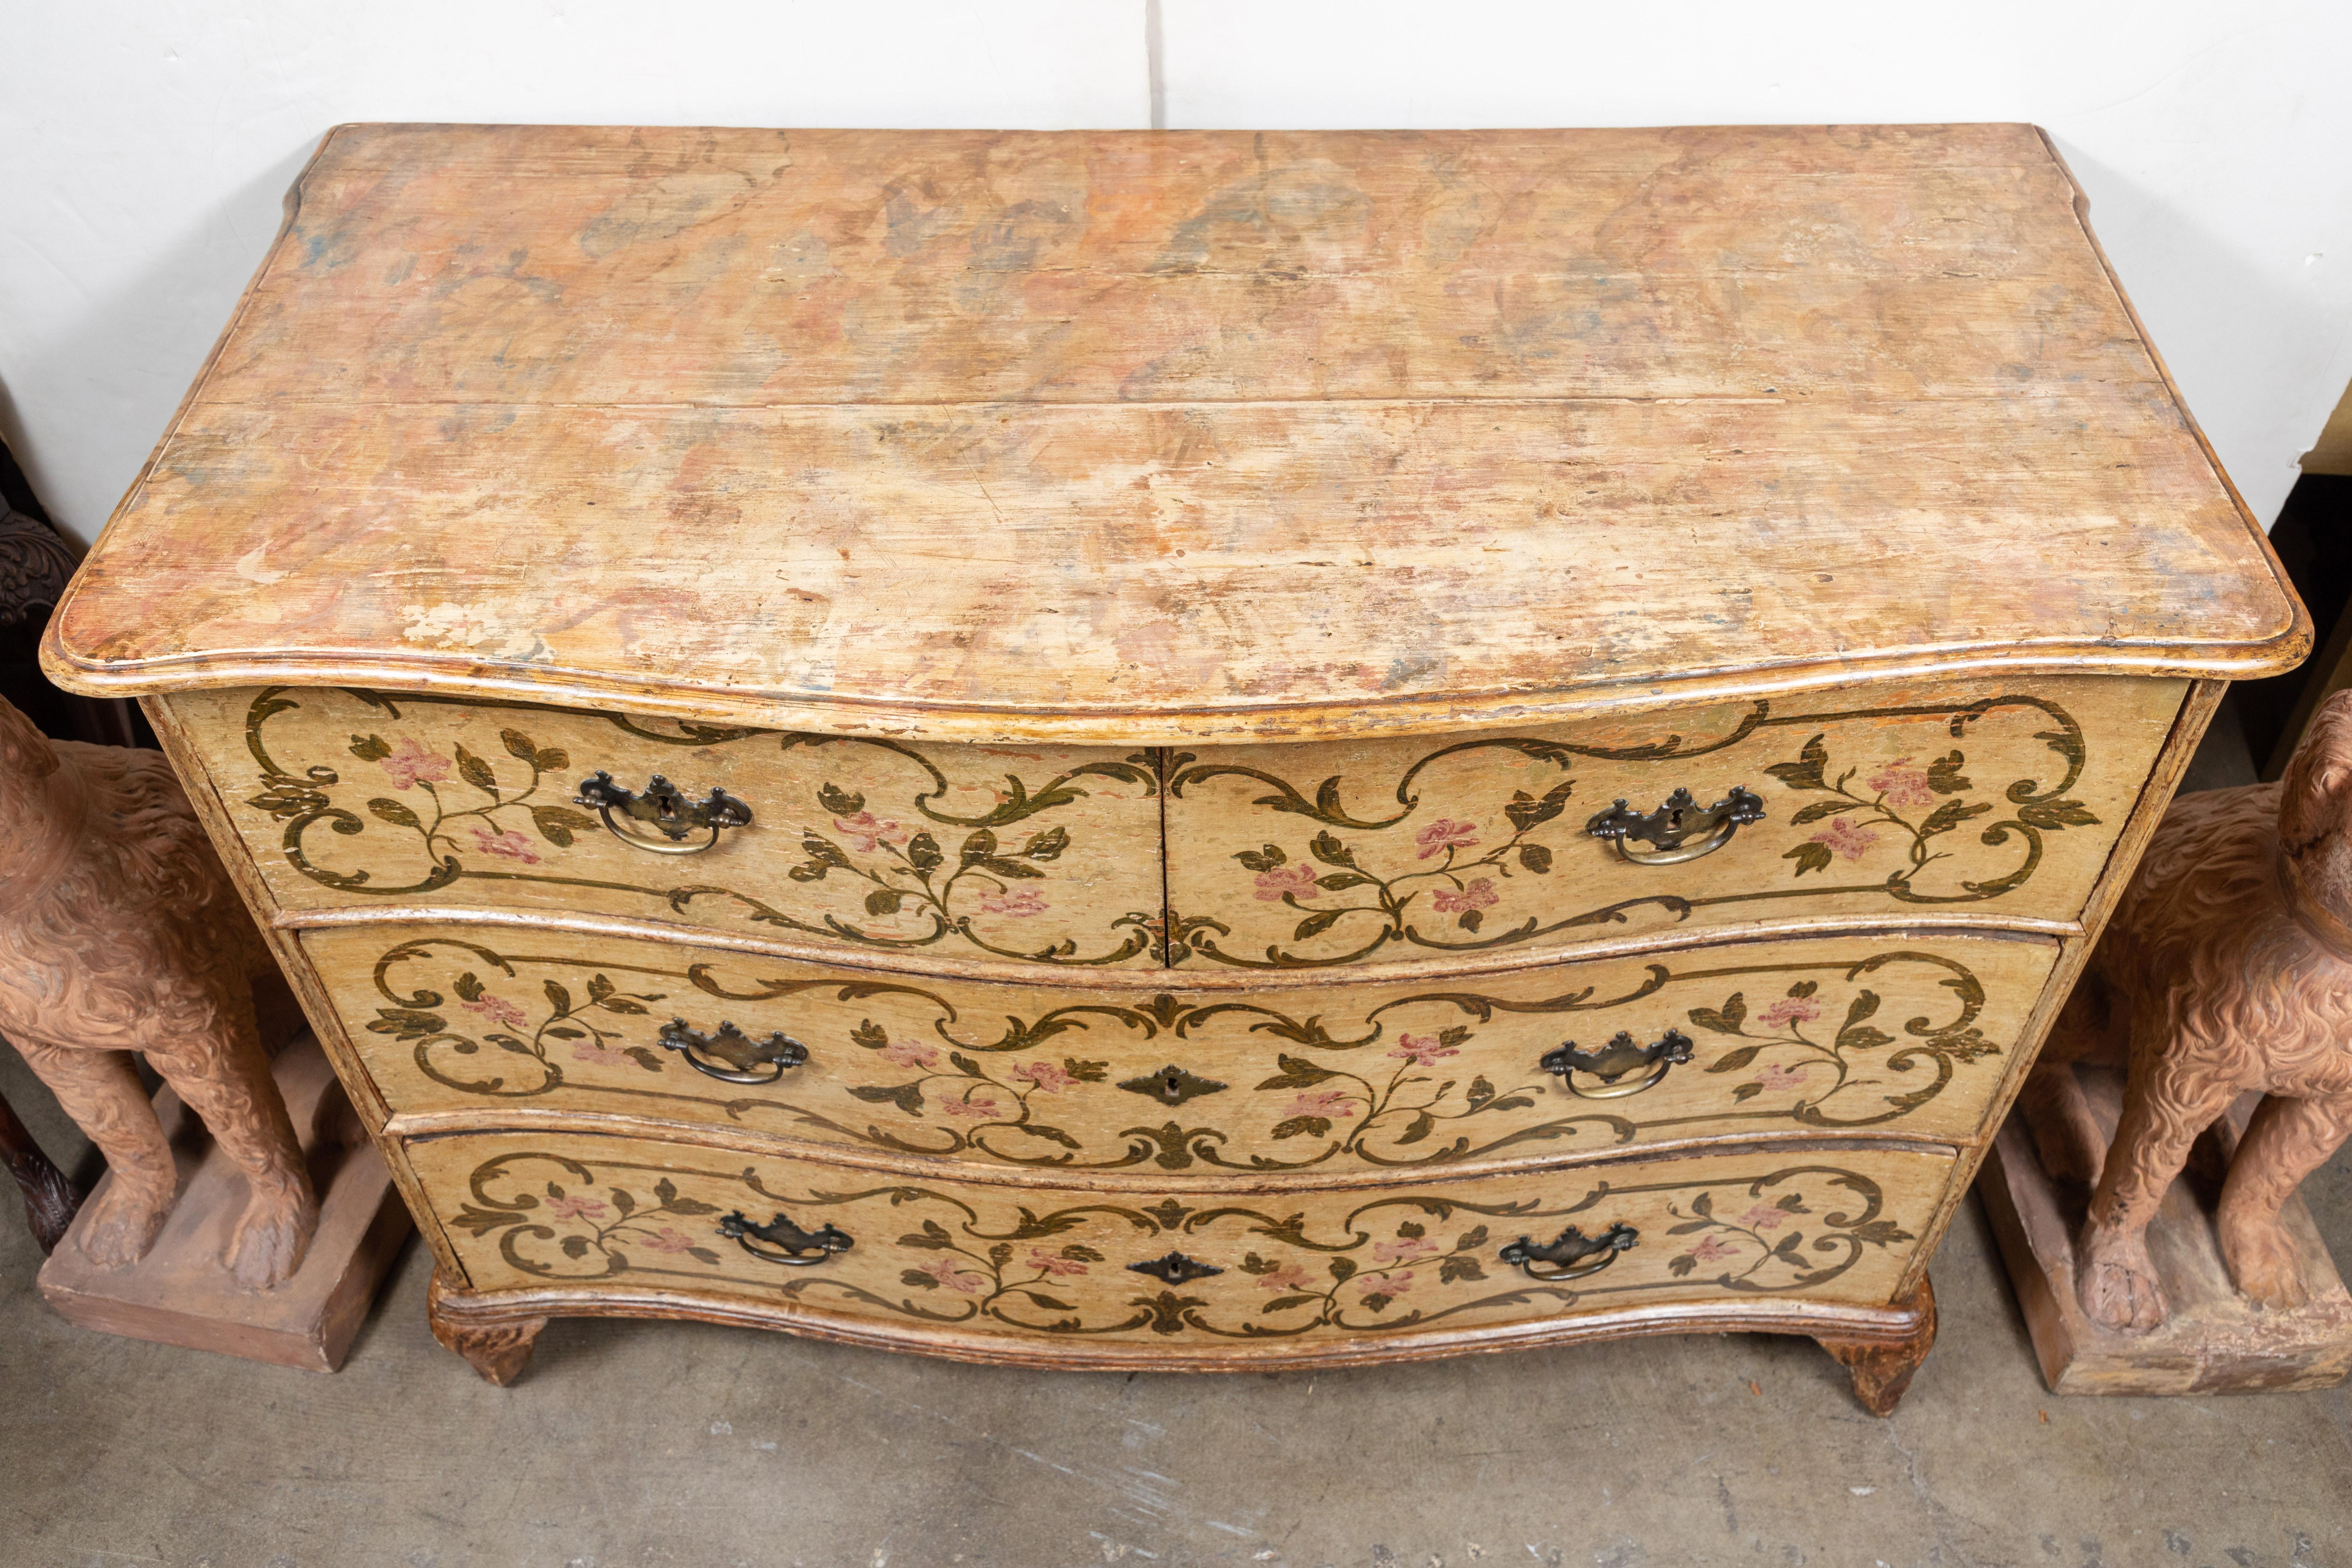 19th Century, Venetian, Floral Painted Commode (Italienisch)